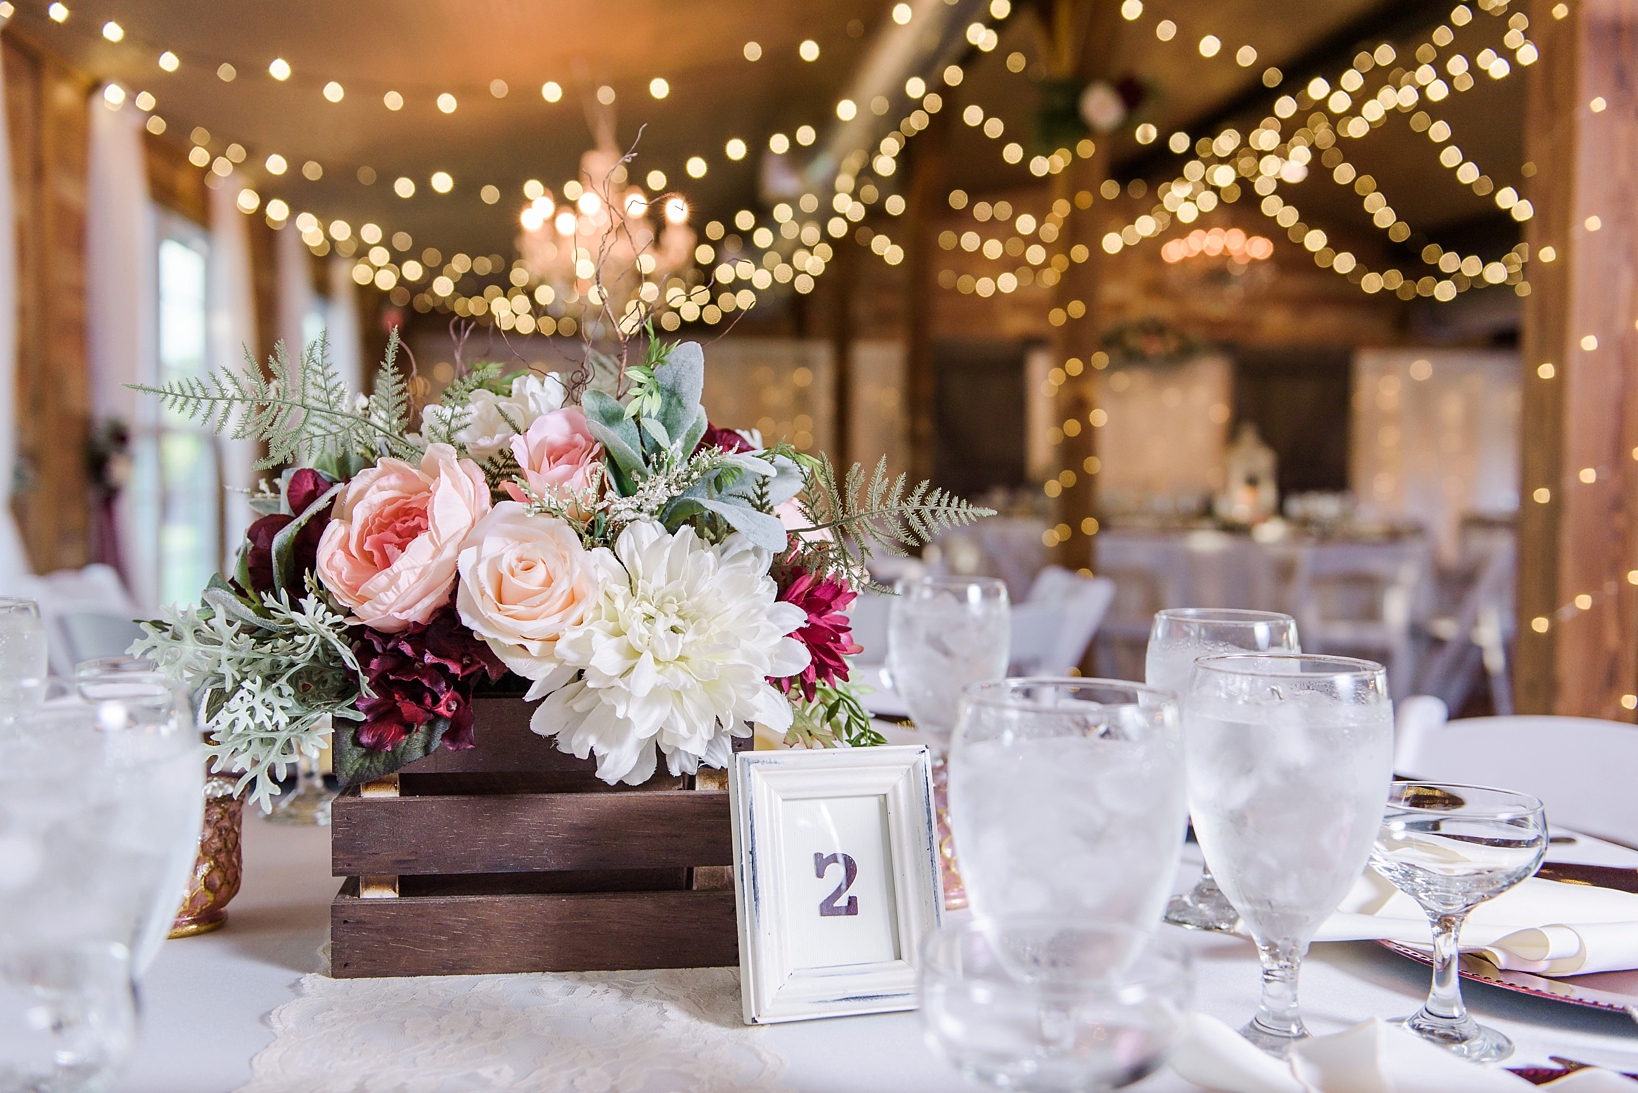 Floral centerpieces in small wooden crates surrounded by string lights in a barn